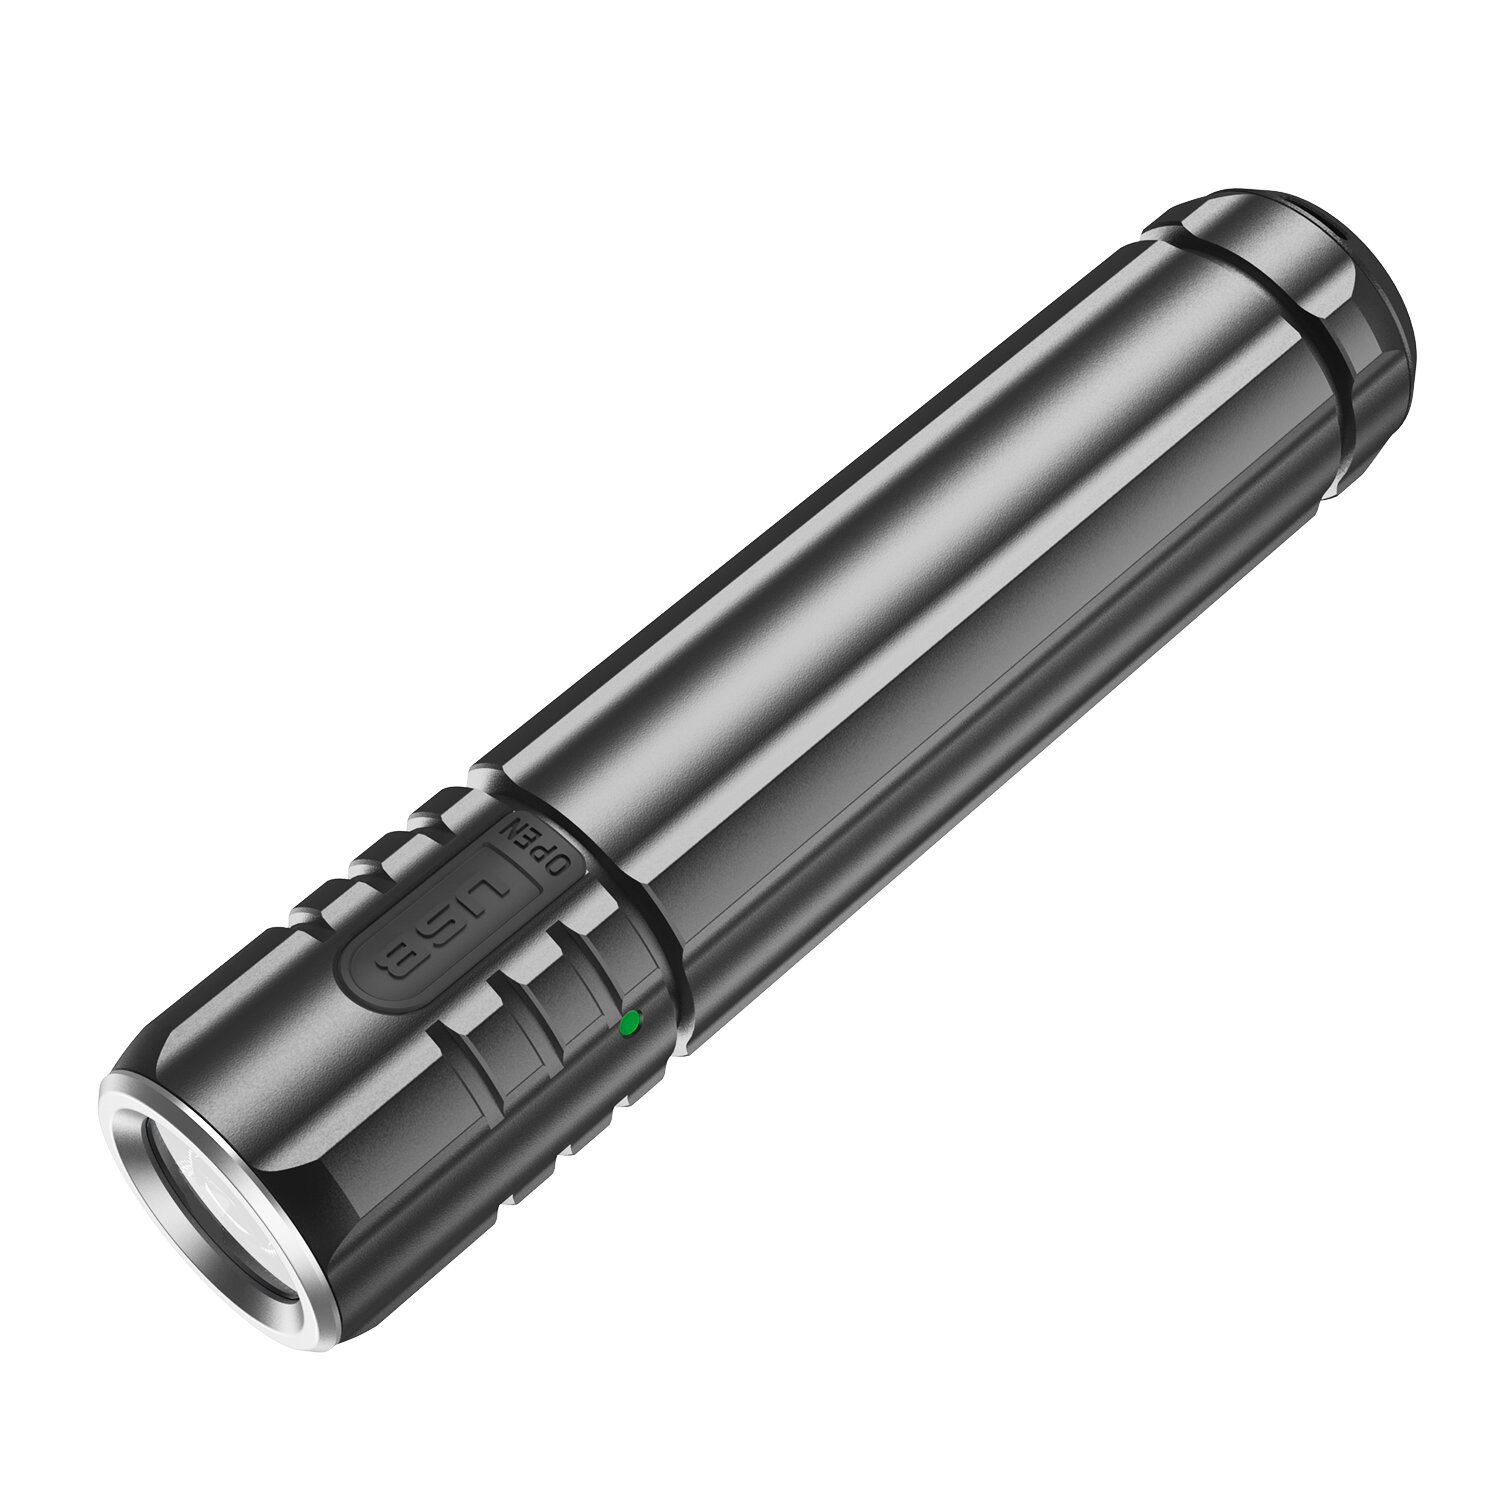 Image of KLARUS EC20 SST-20 1100LM Mini LED Torch Rechargeable Powerful Flashlight With 18650 Battery For CampingHiking